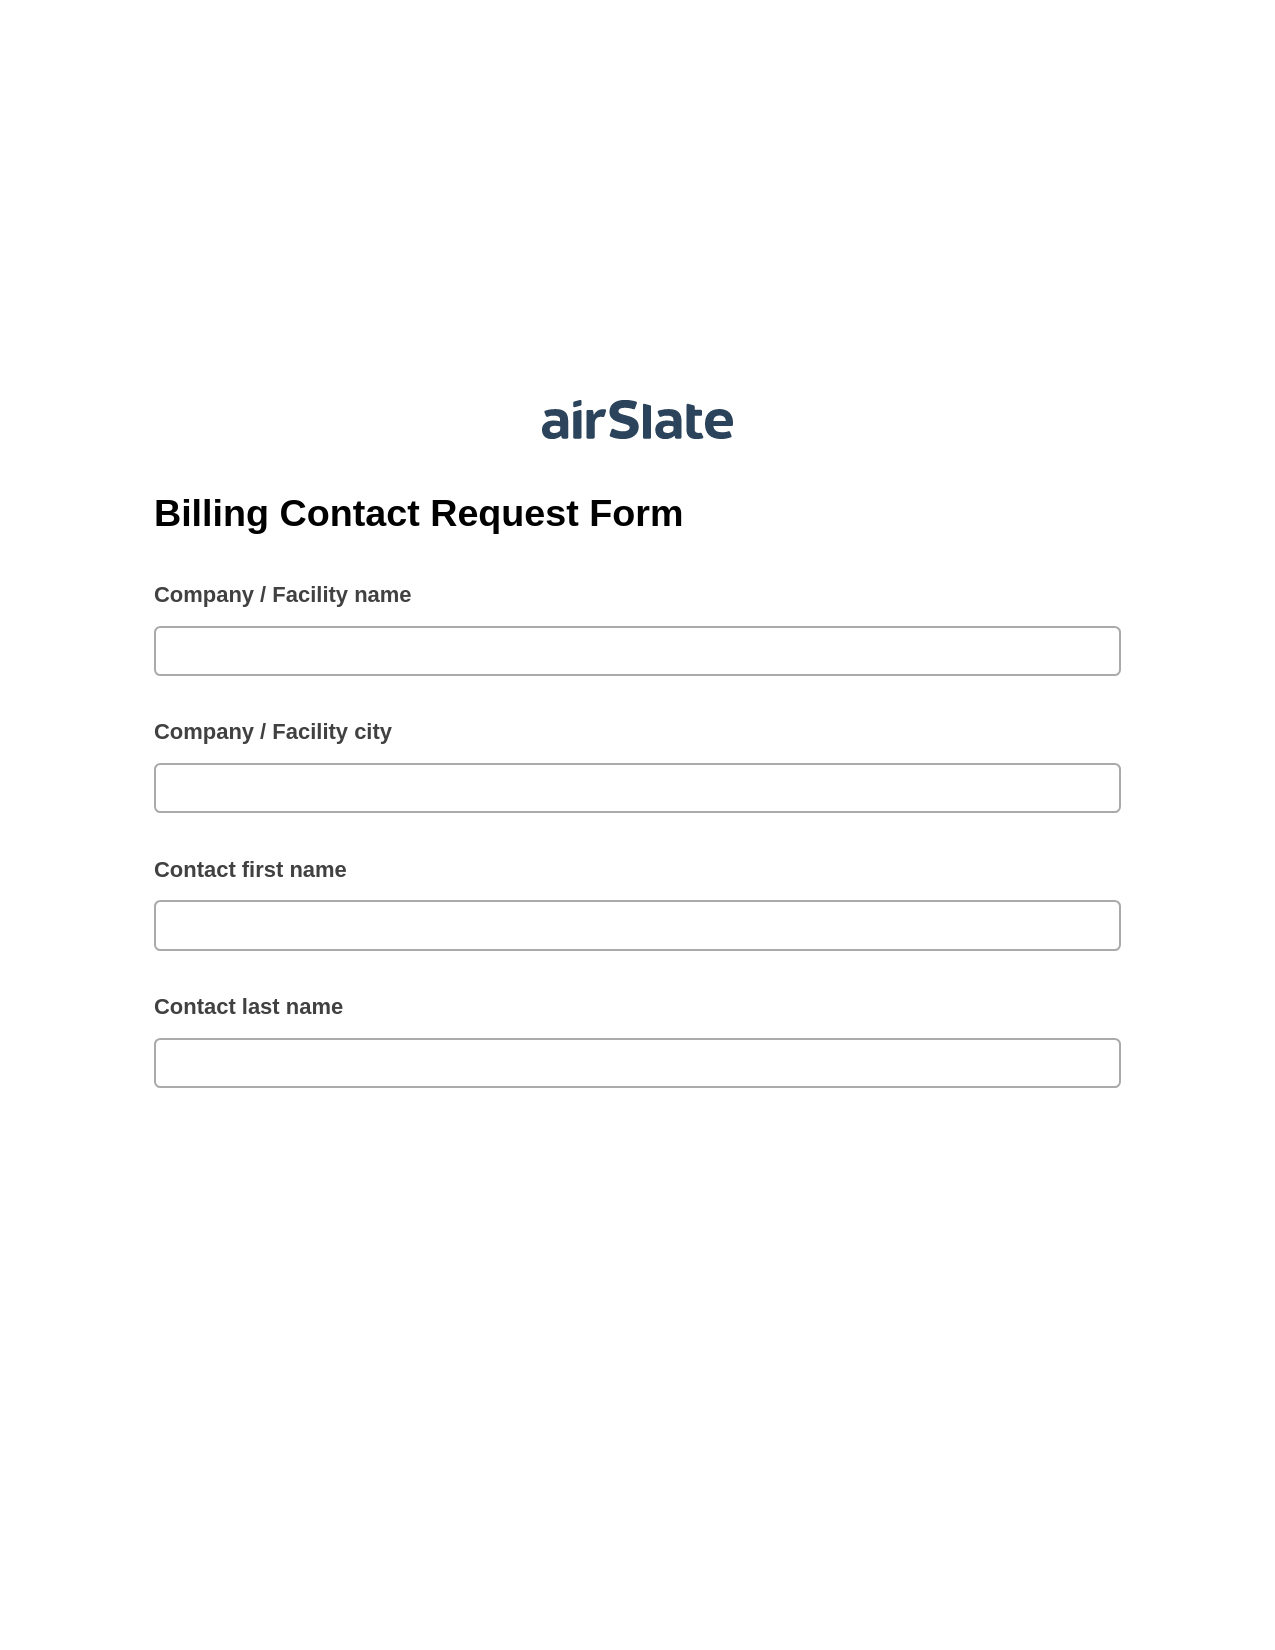 Multirole Billing Contact Request Form Pre-fill from Excel Spreadsheet Bot, Assign Slate Name Bot, Export to Excel 365 Bot